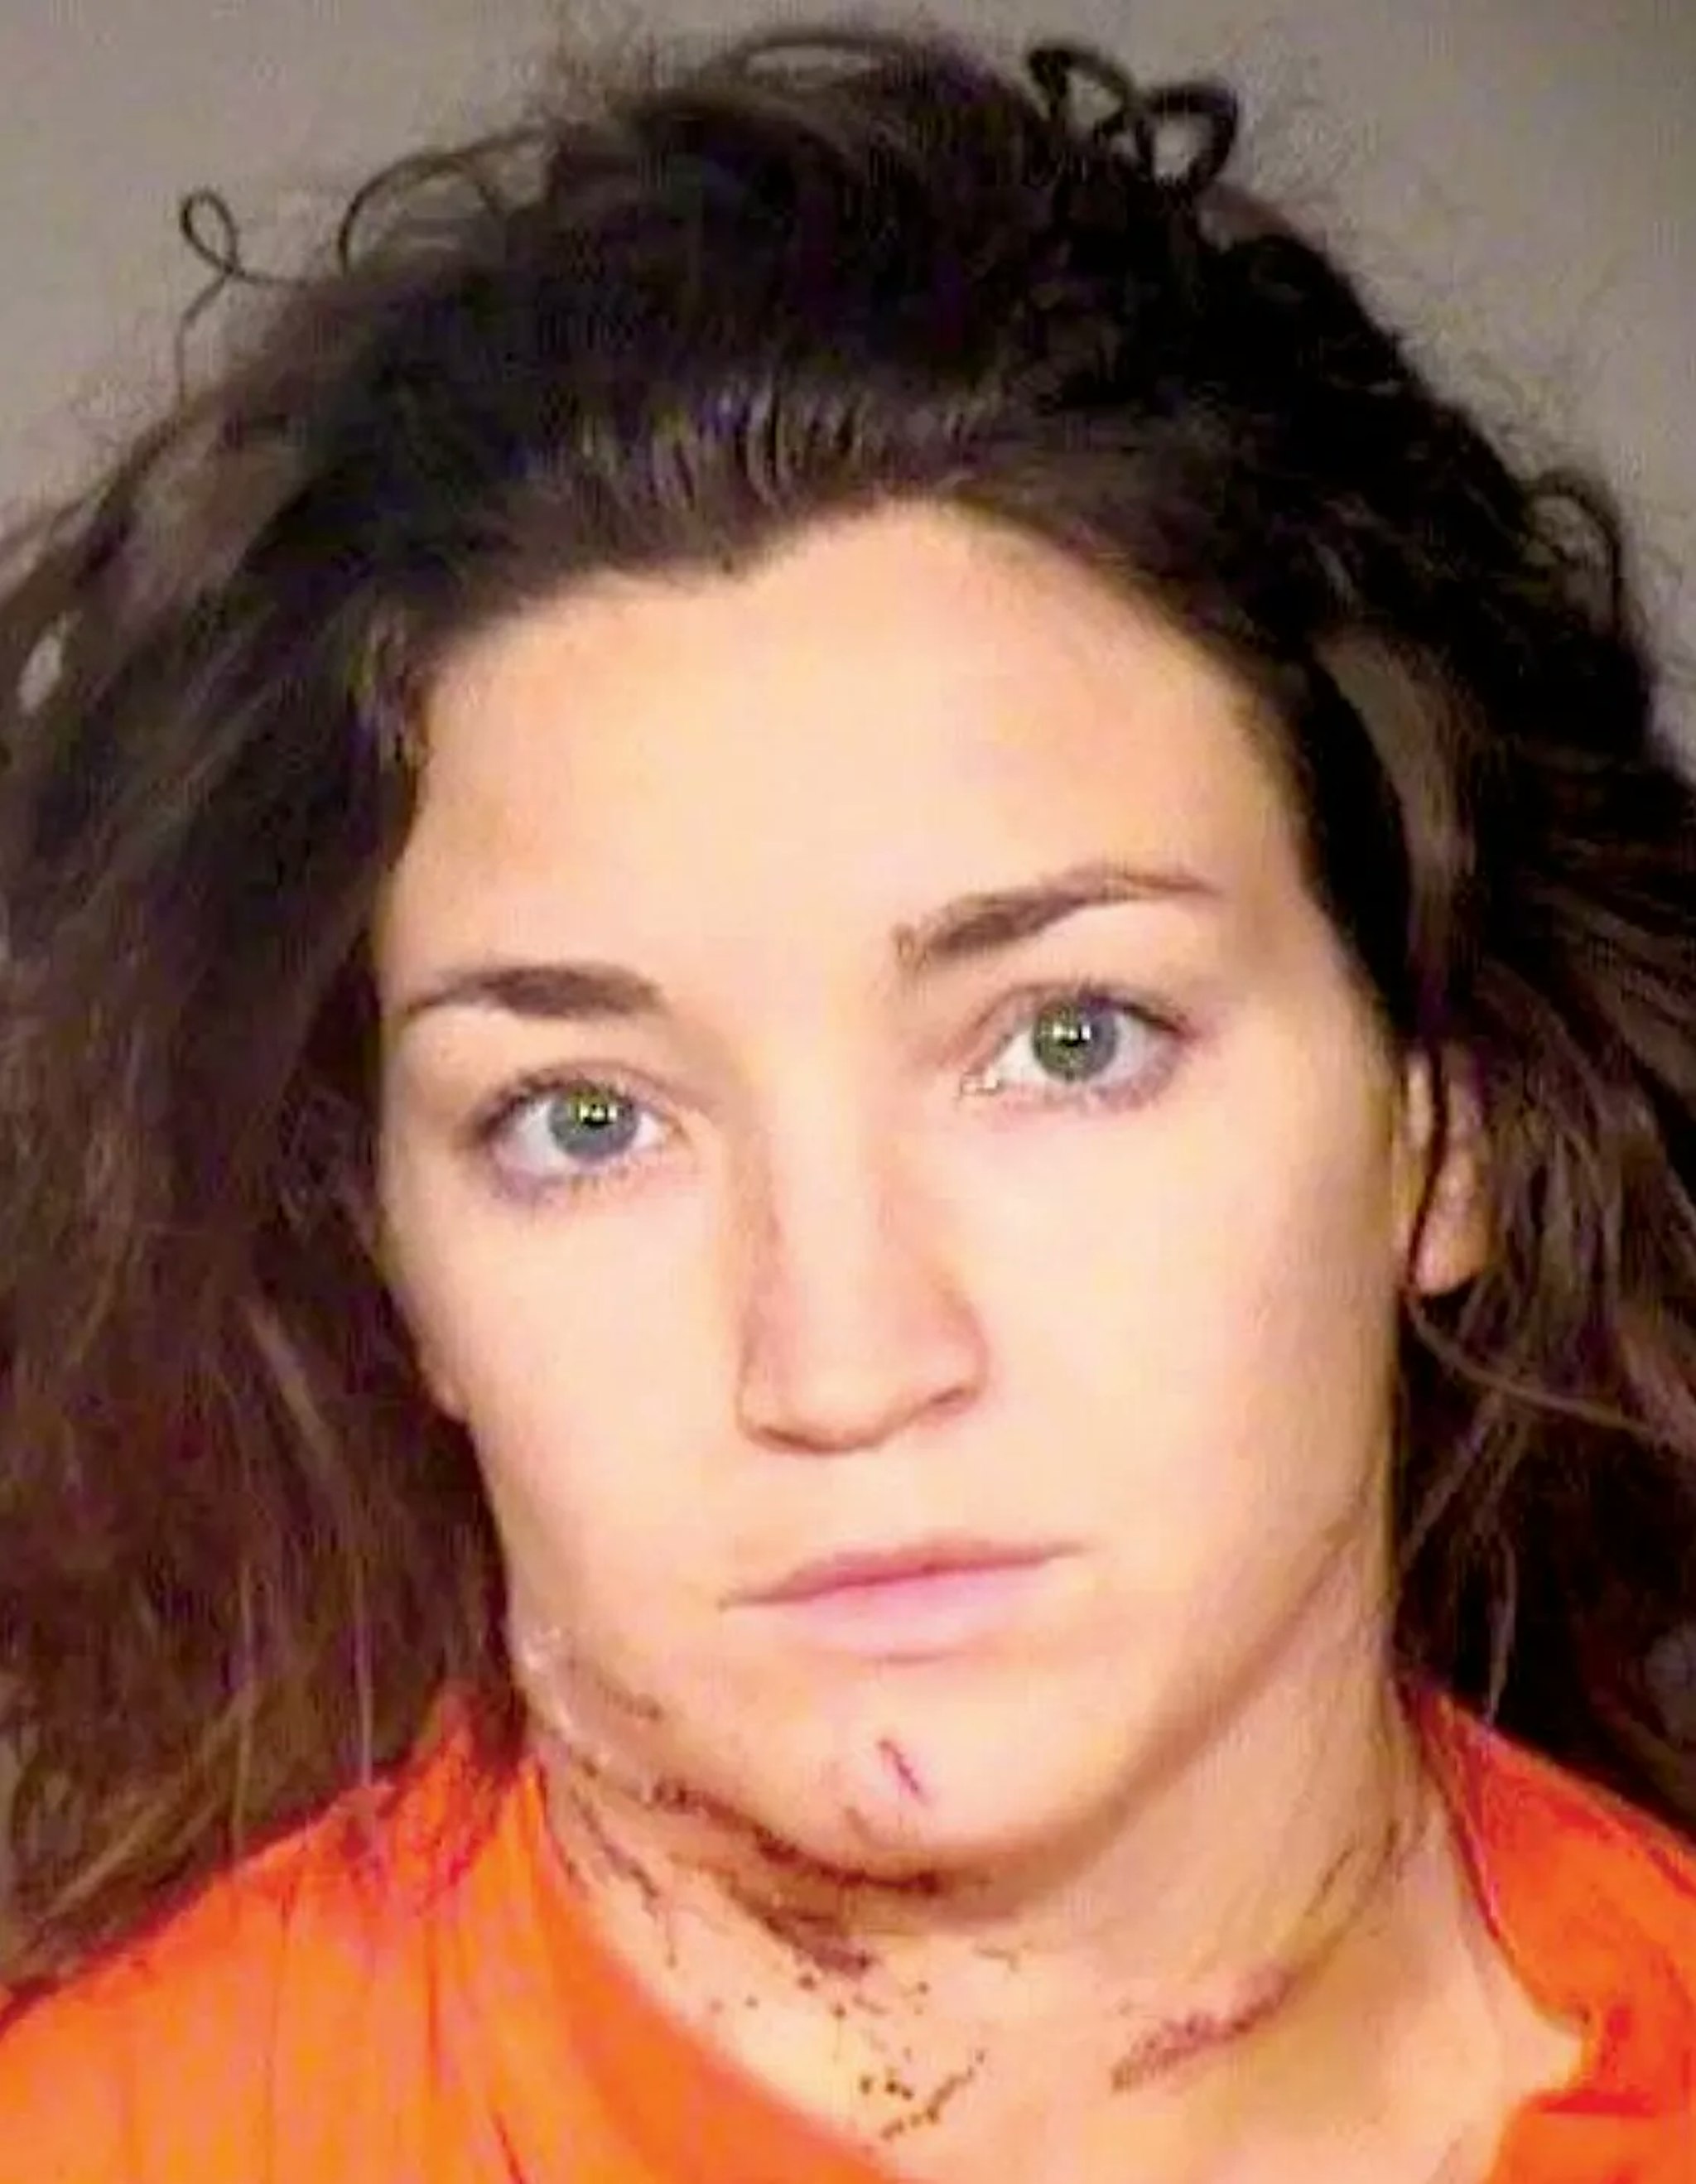 Bryn Spejcher, 33, is appealing the probation and community service sentence she received after stabbing her boyfriend 108 times, resulting in his death.